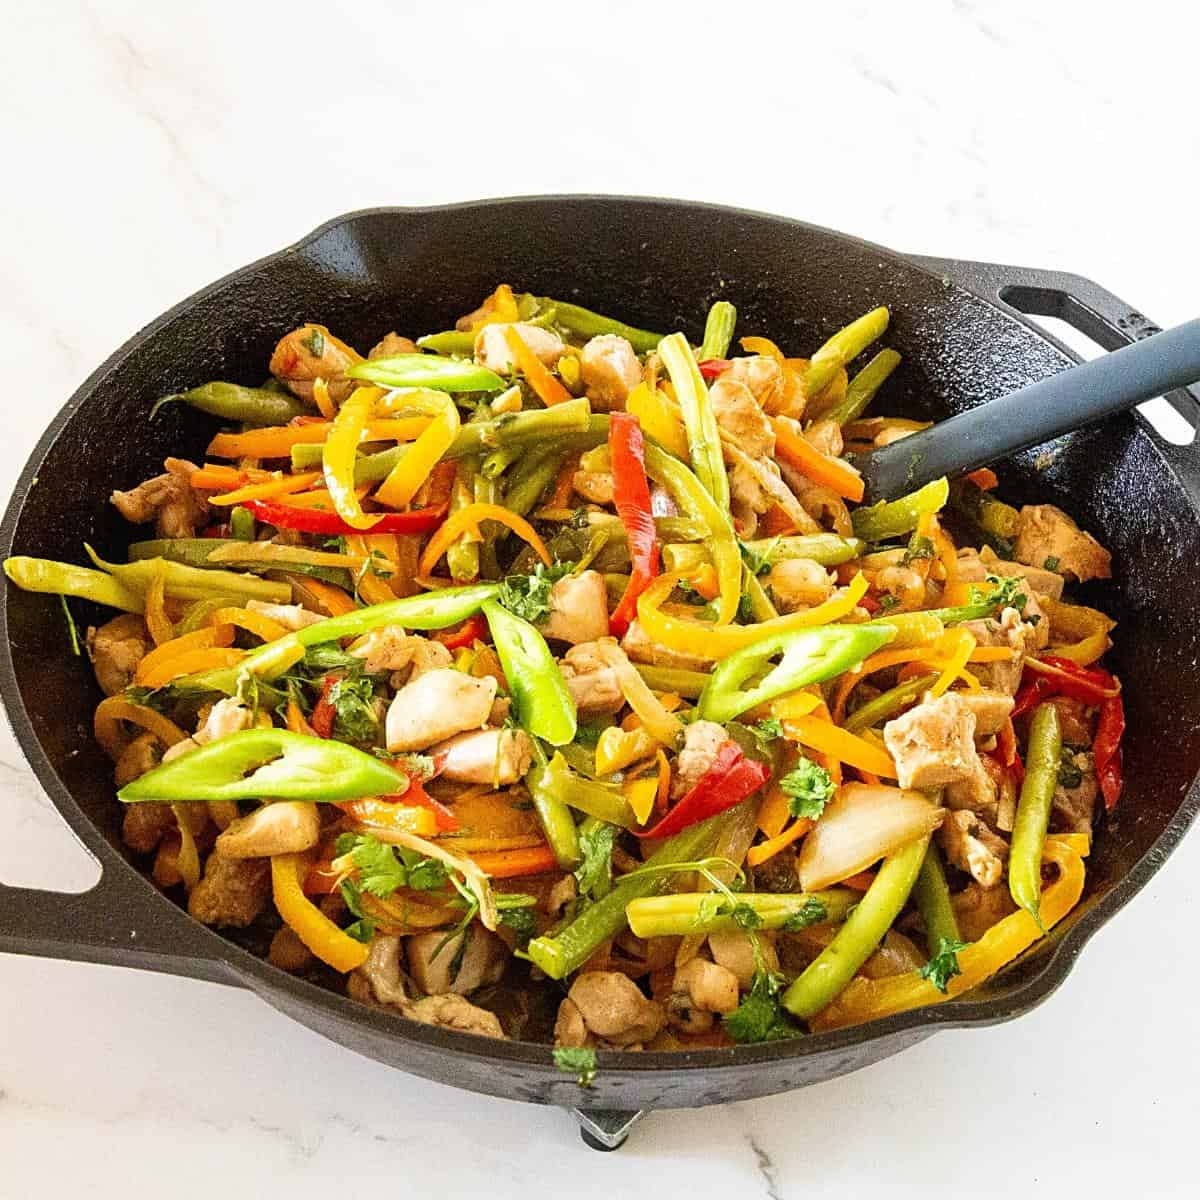 A large skillet with stir fried chicken and vegetables.